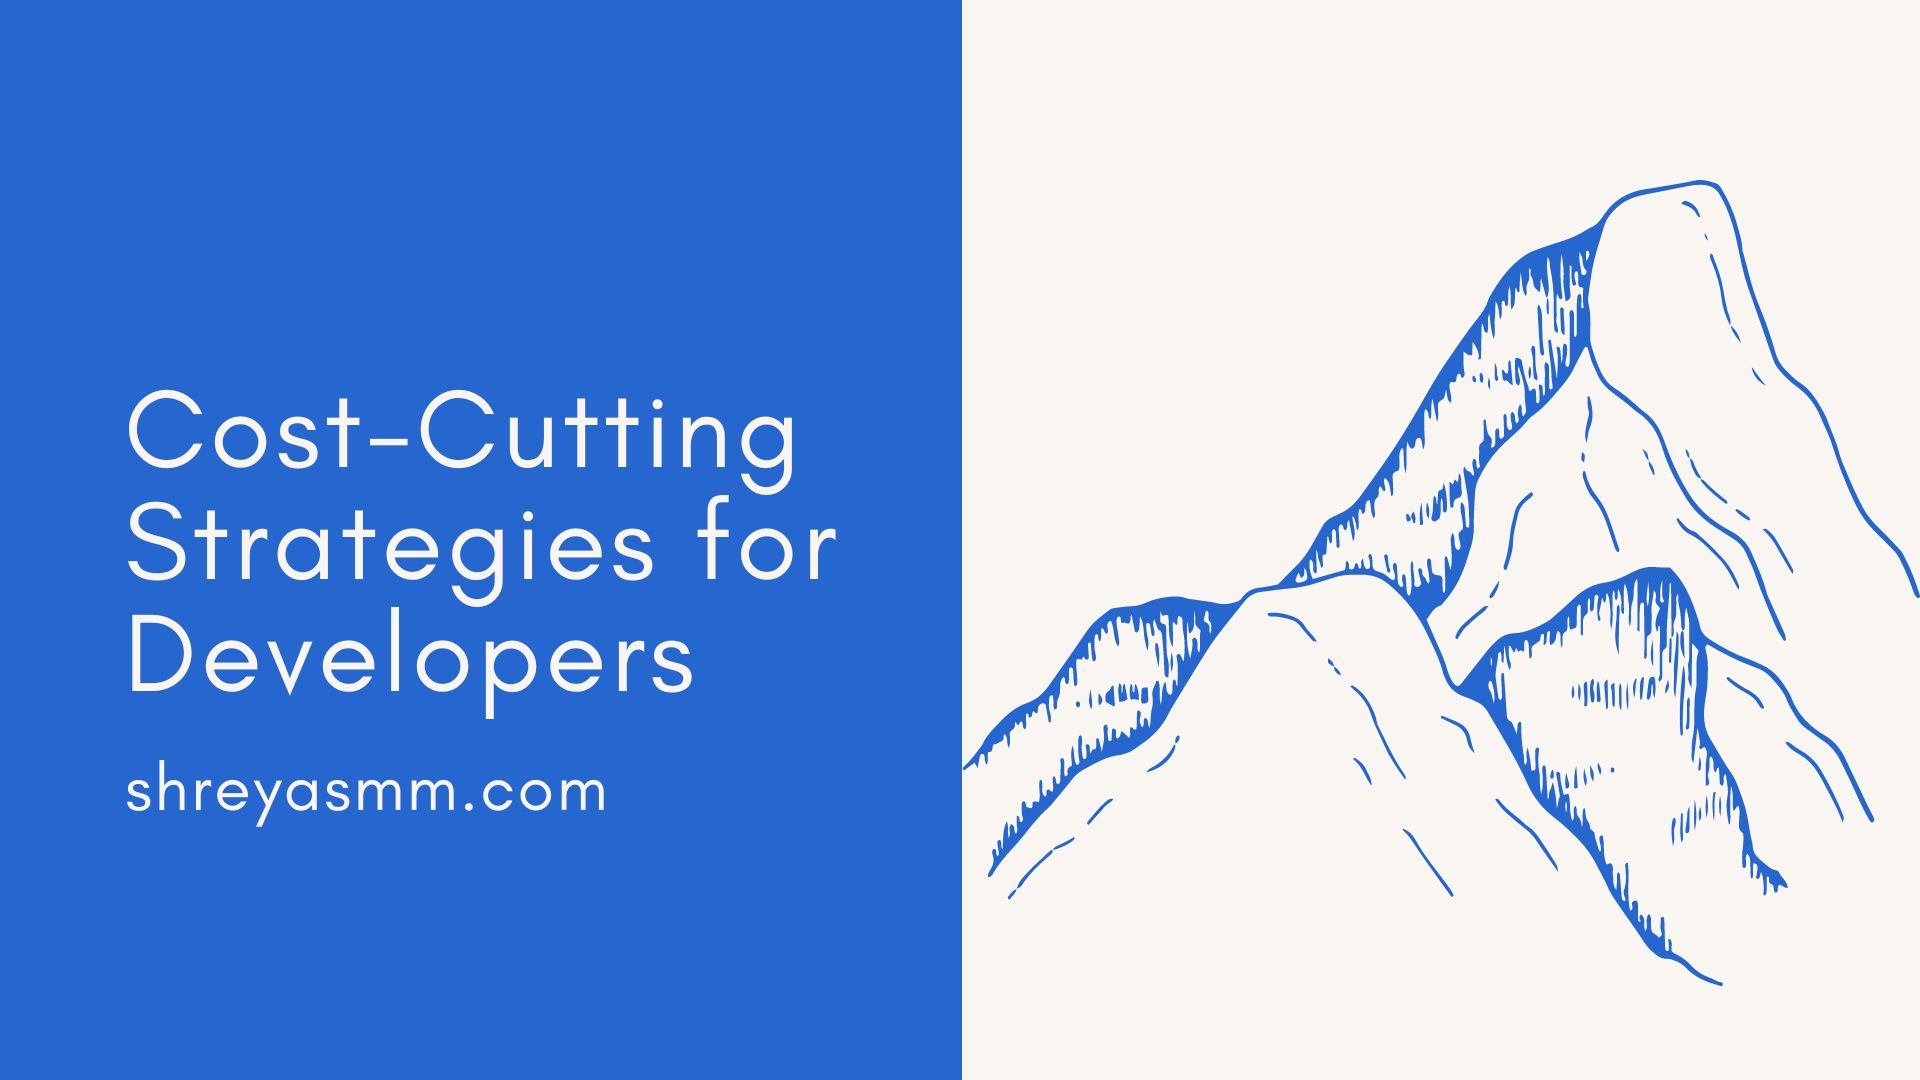 Cost-Cutting Strategies for Developers